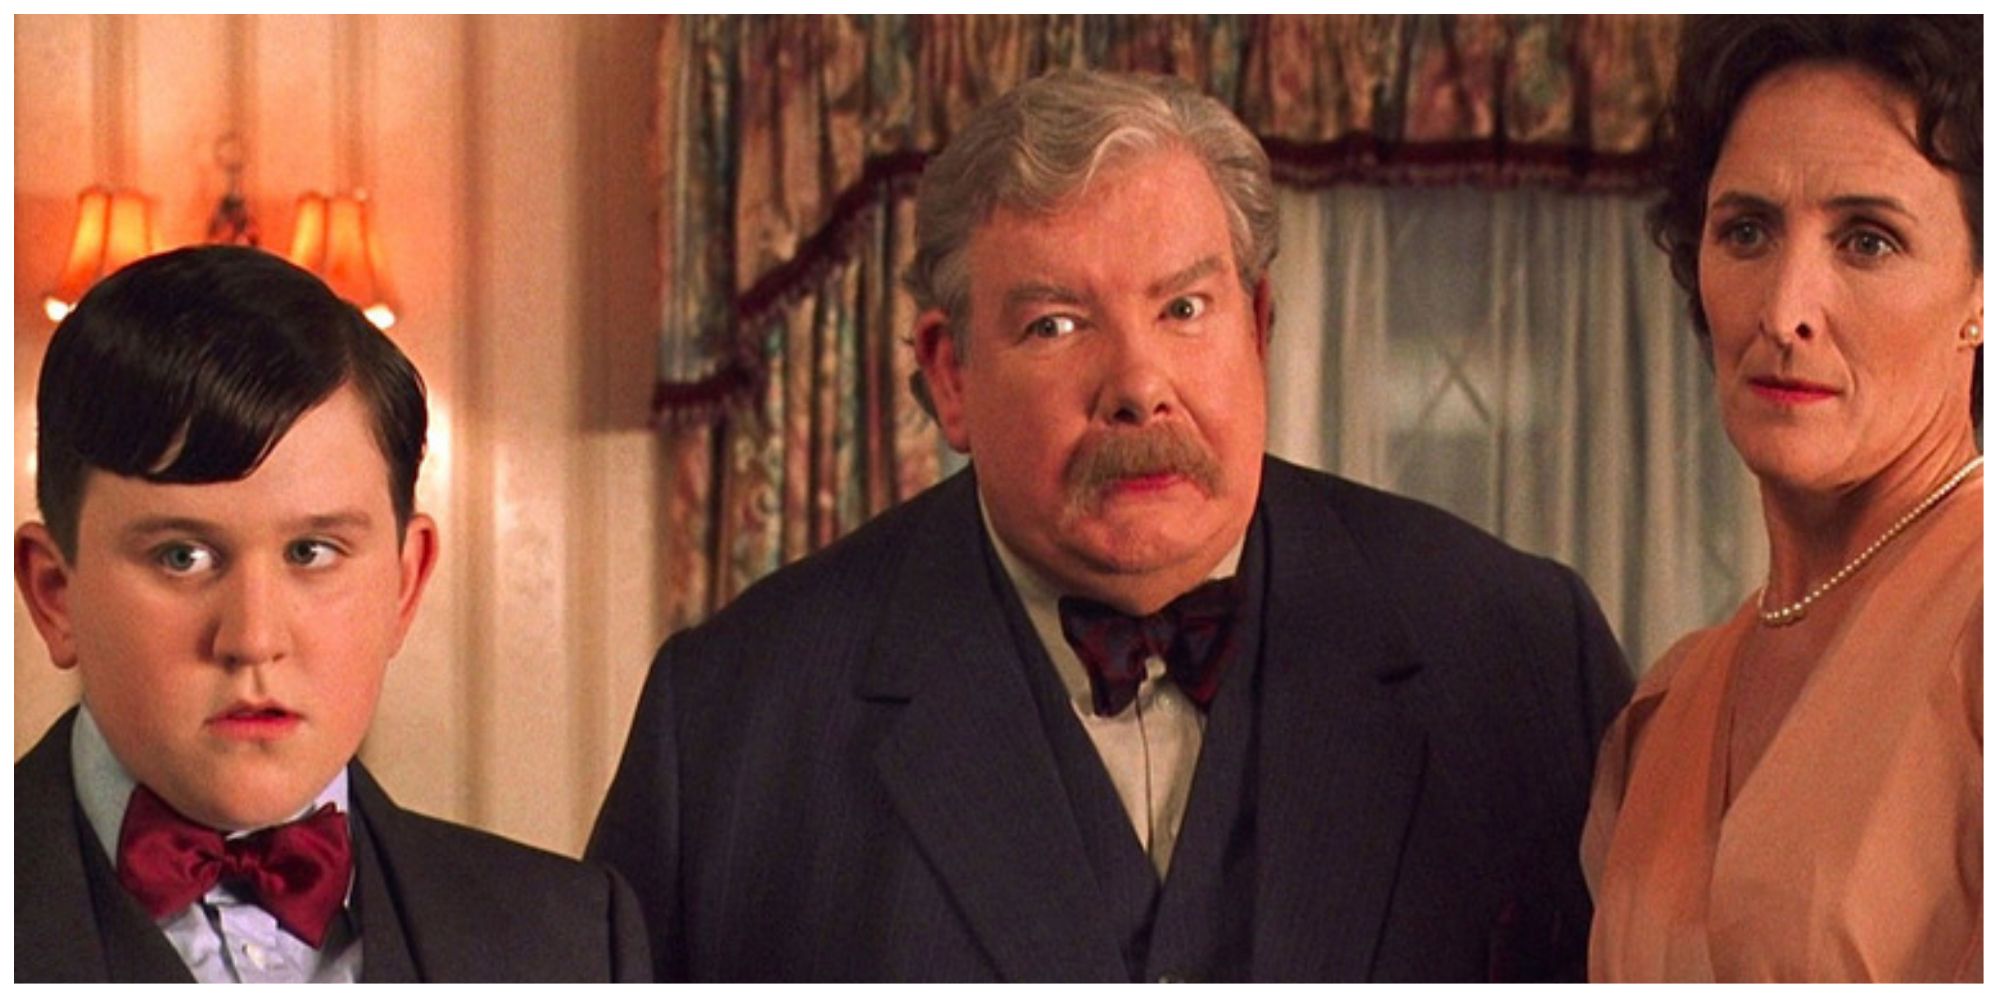 Dudley, Vernon, and Petunia Dursley in the Harry Potter Movies